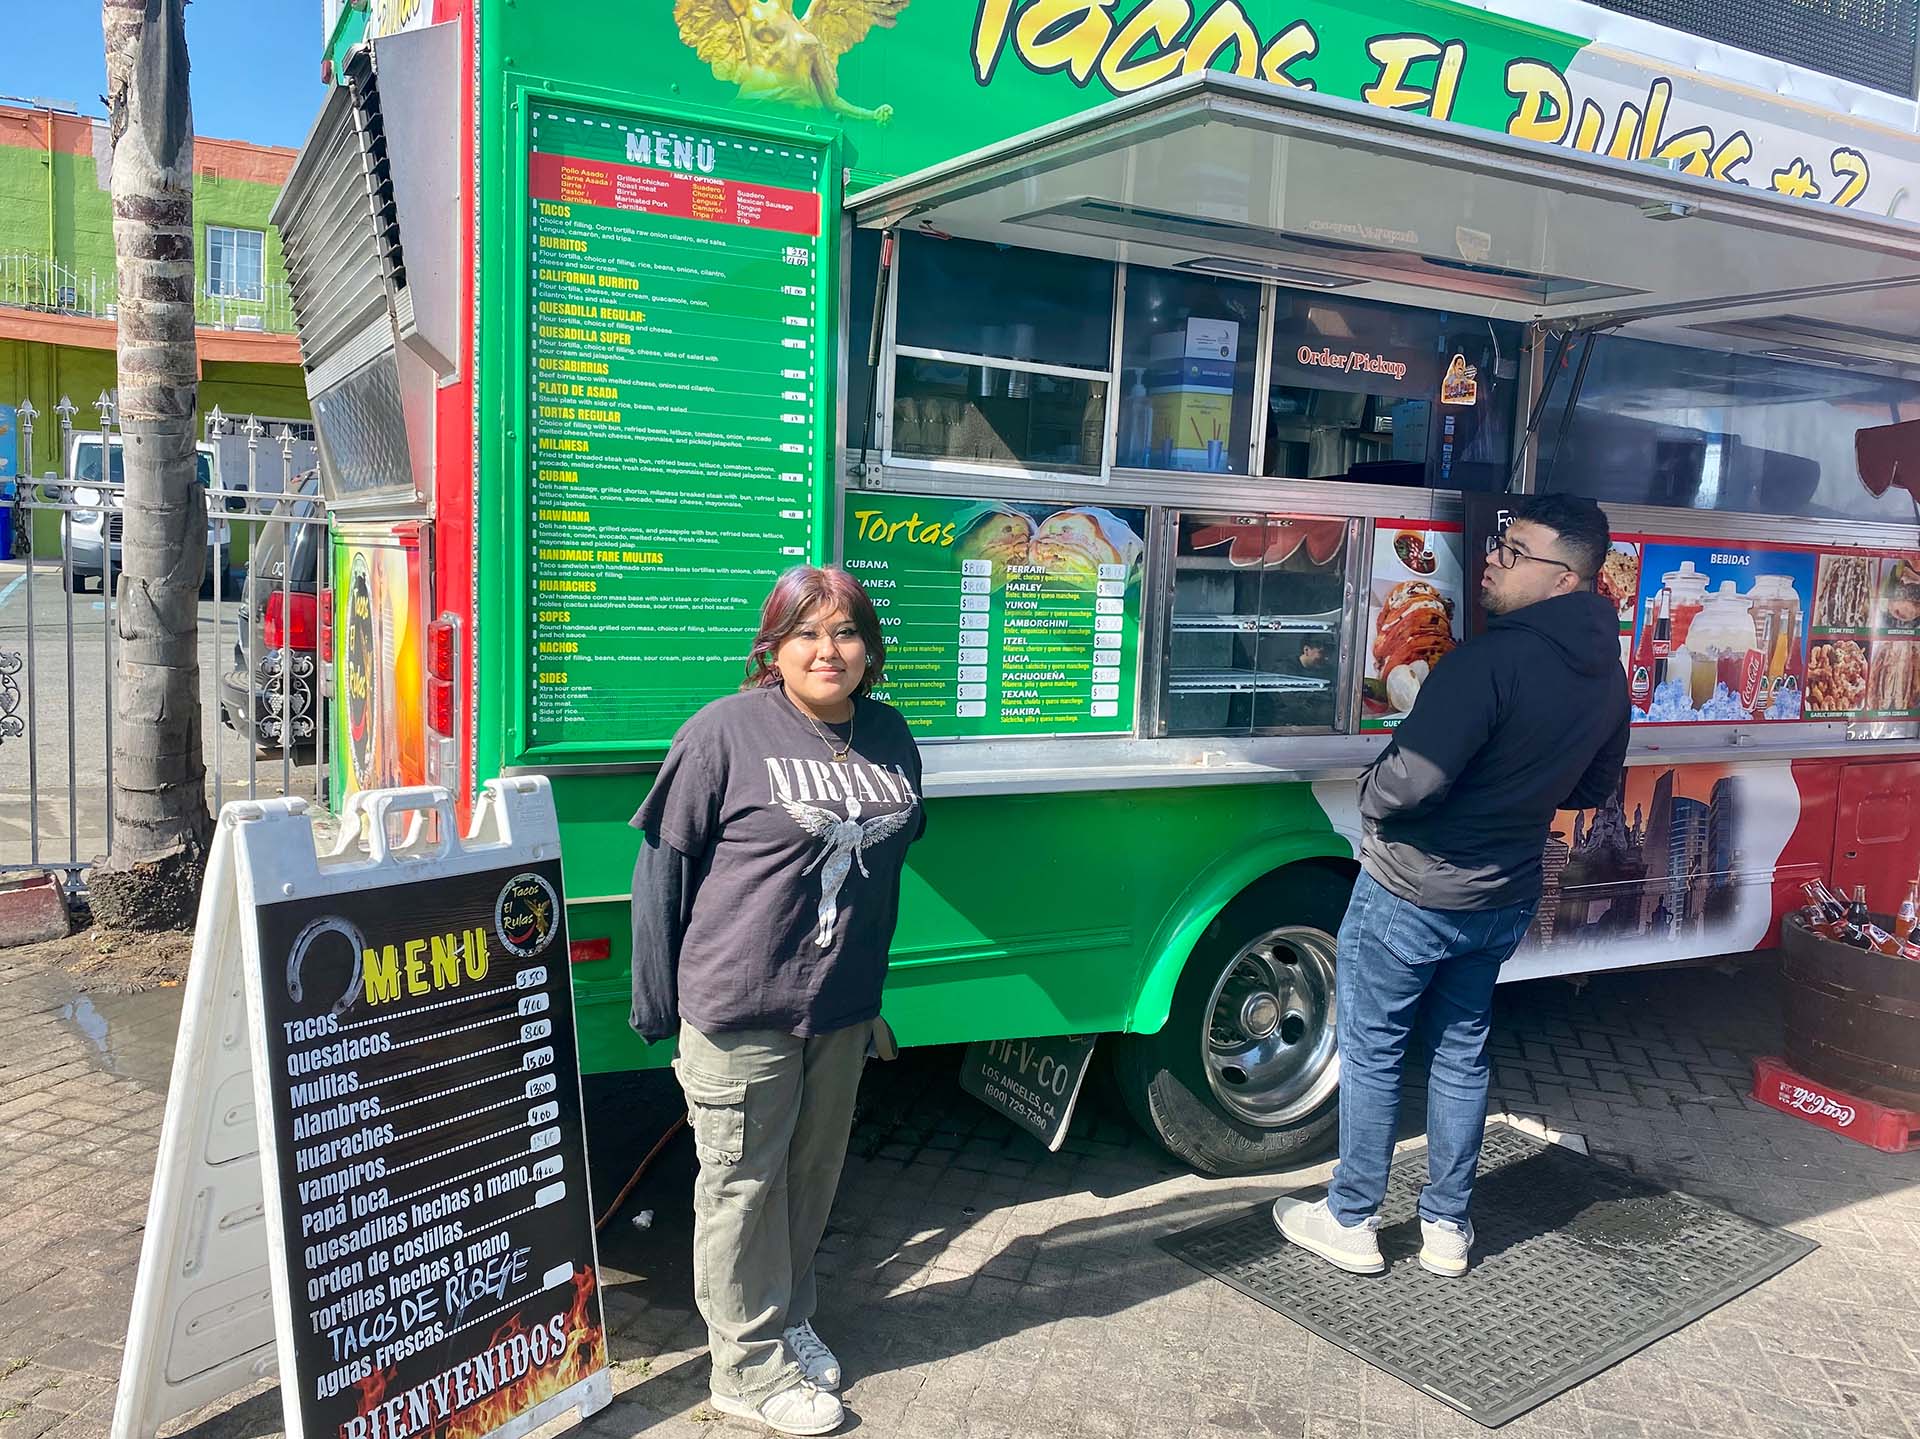 A teenage girl in a black long-sleeved Nirvana T-shirt stands in front of a green taco truck.